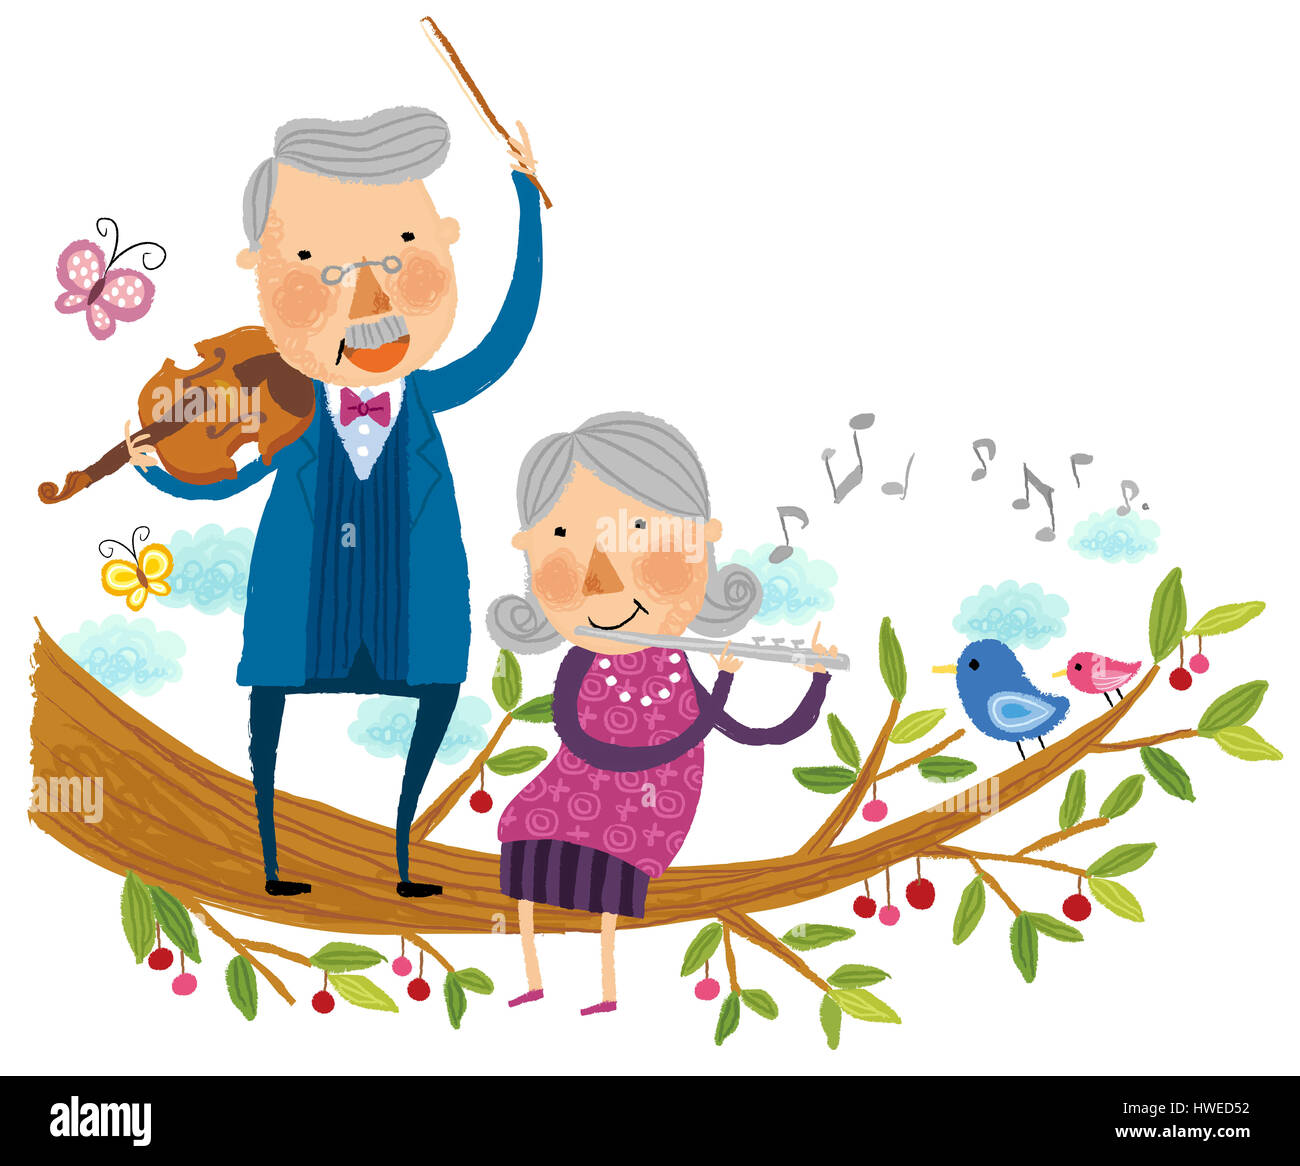 elderly couple,playing,musical instruments,horizontal,flute,violin,music,musician,happy,butterfly. tree,branch,branch of tree,leaves,leave,standing,sitting,instruments,cheering,cheerful,family,elderly people,elderly person,elderly couple,couple,togetherness,elderly woman,elderly Stock Photo